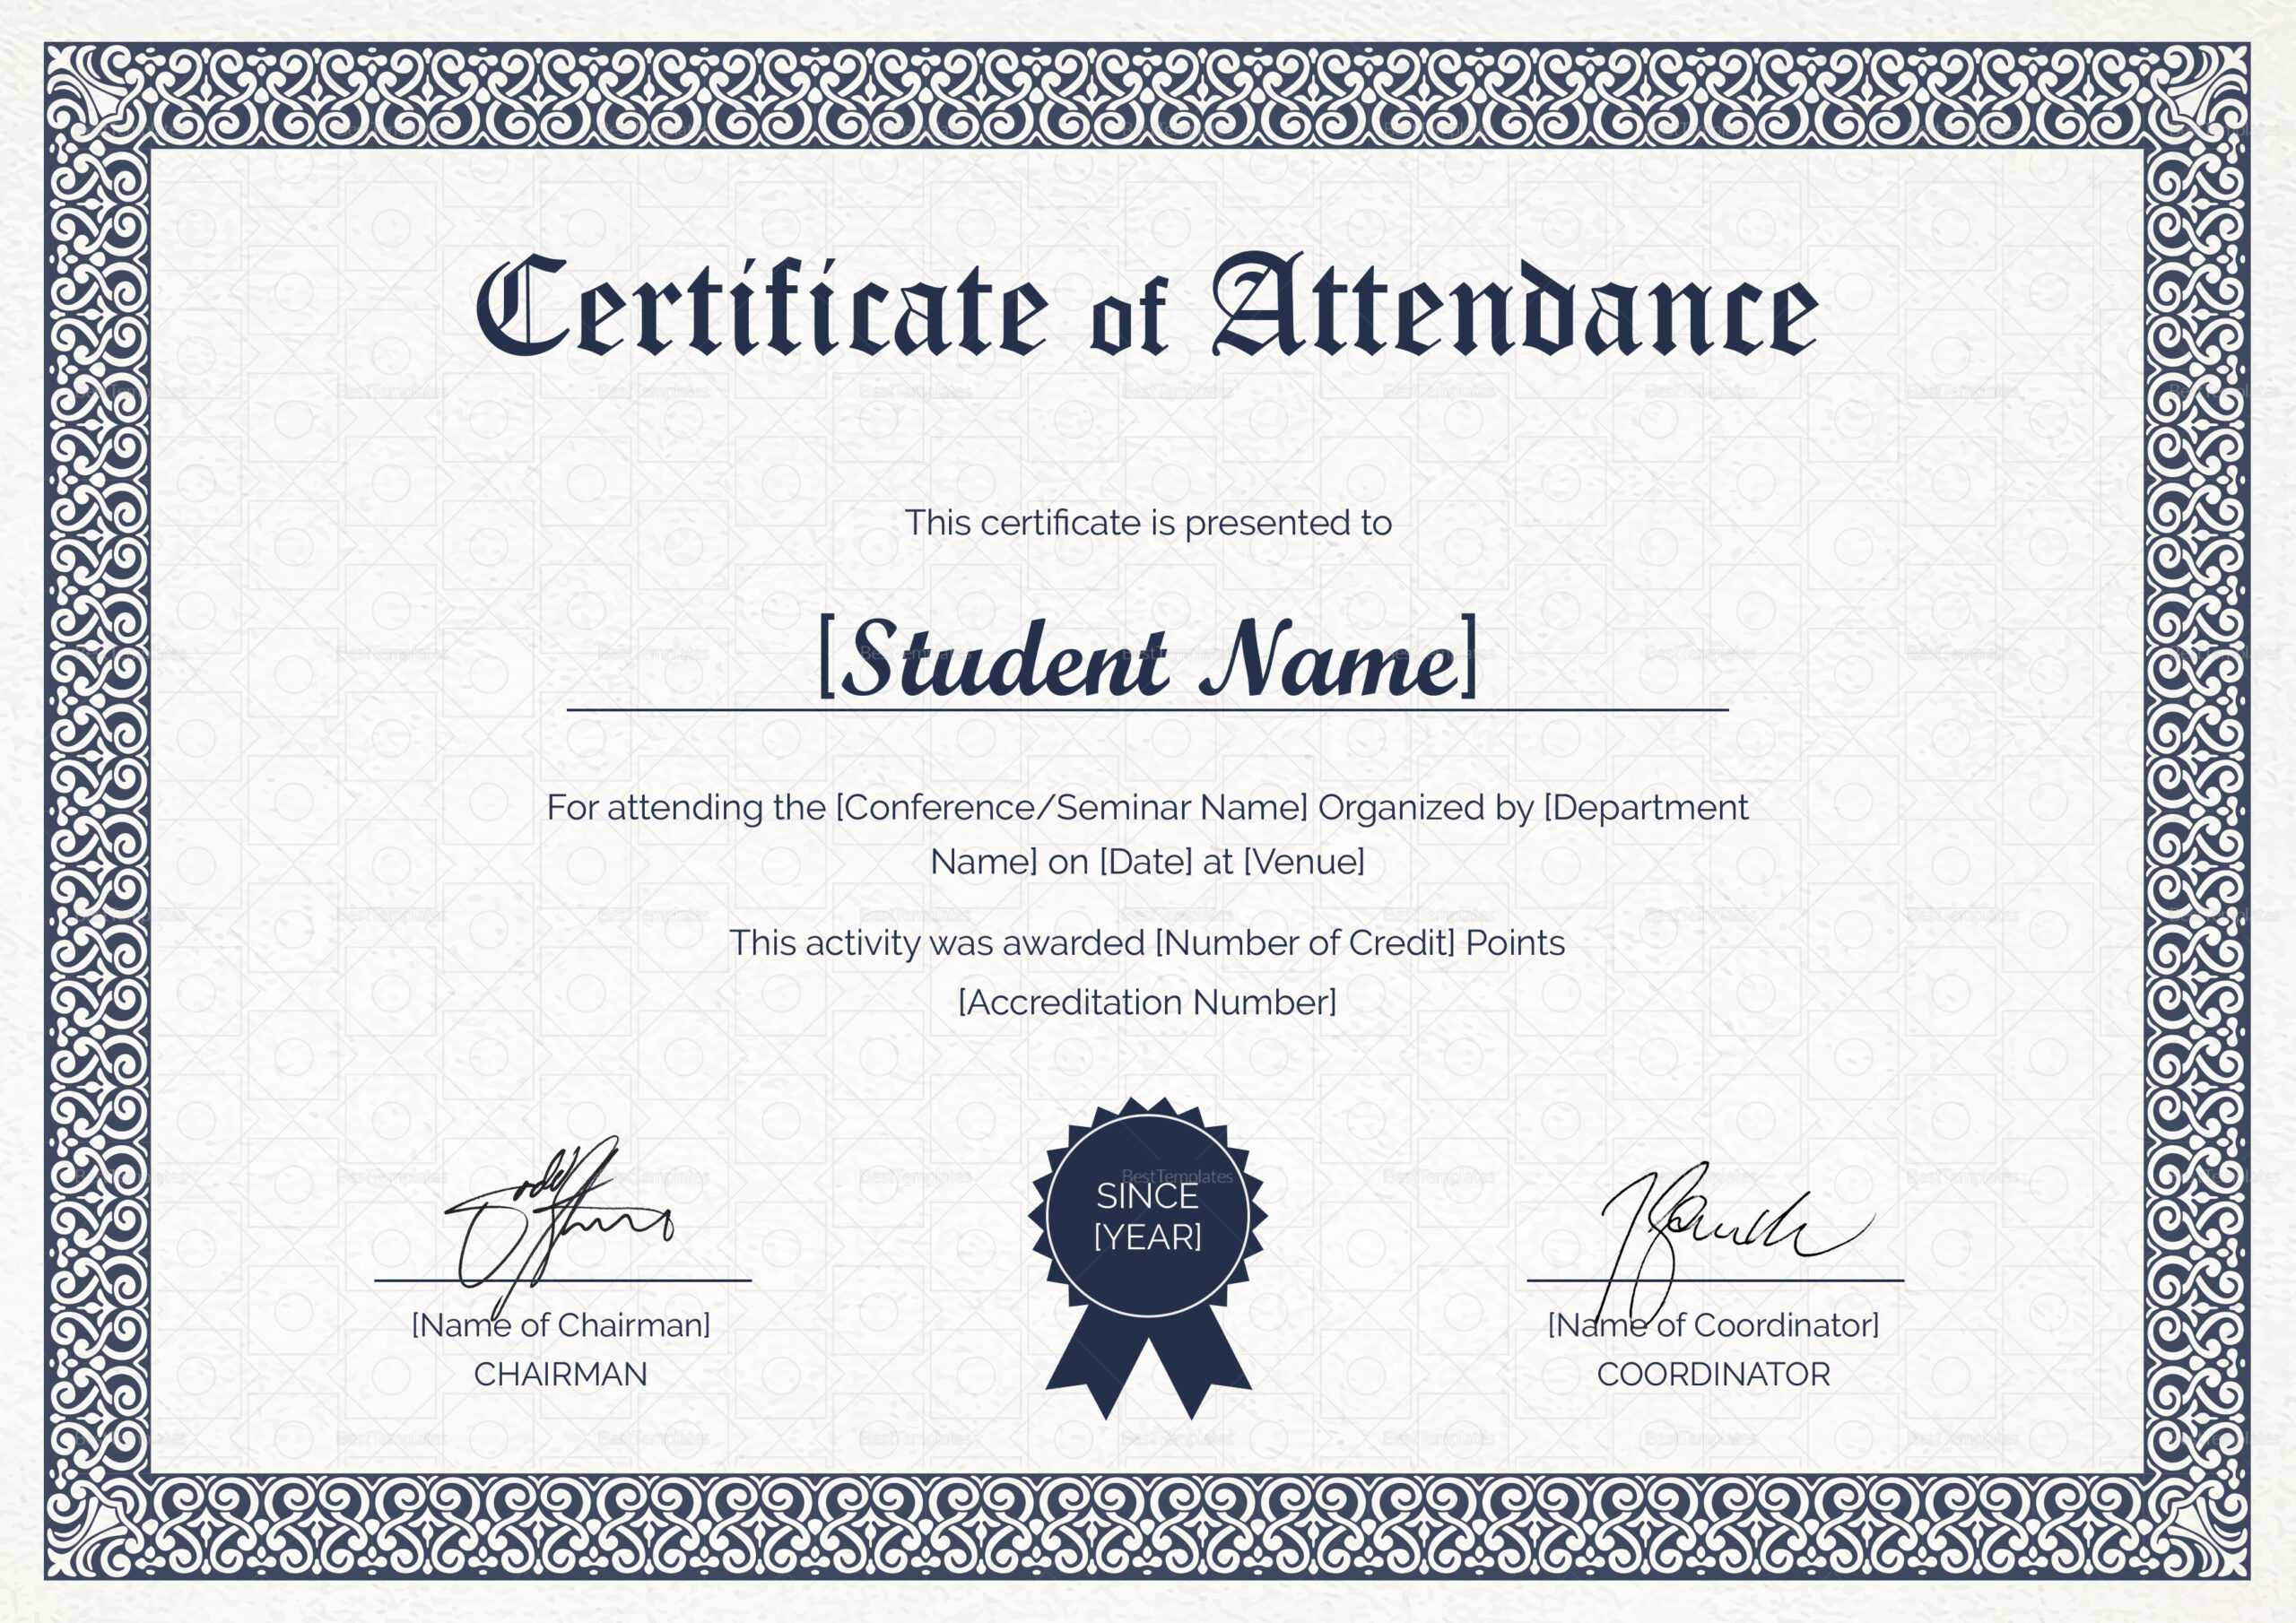 Students Attendance Certificate Template With Regard To Conference Certificate Of Attendance Template